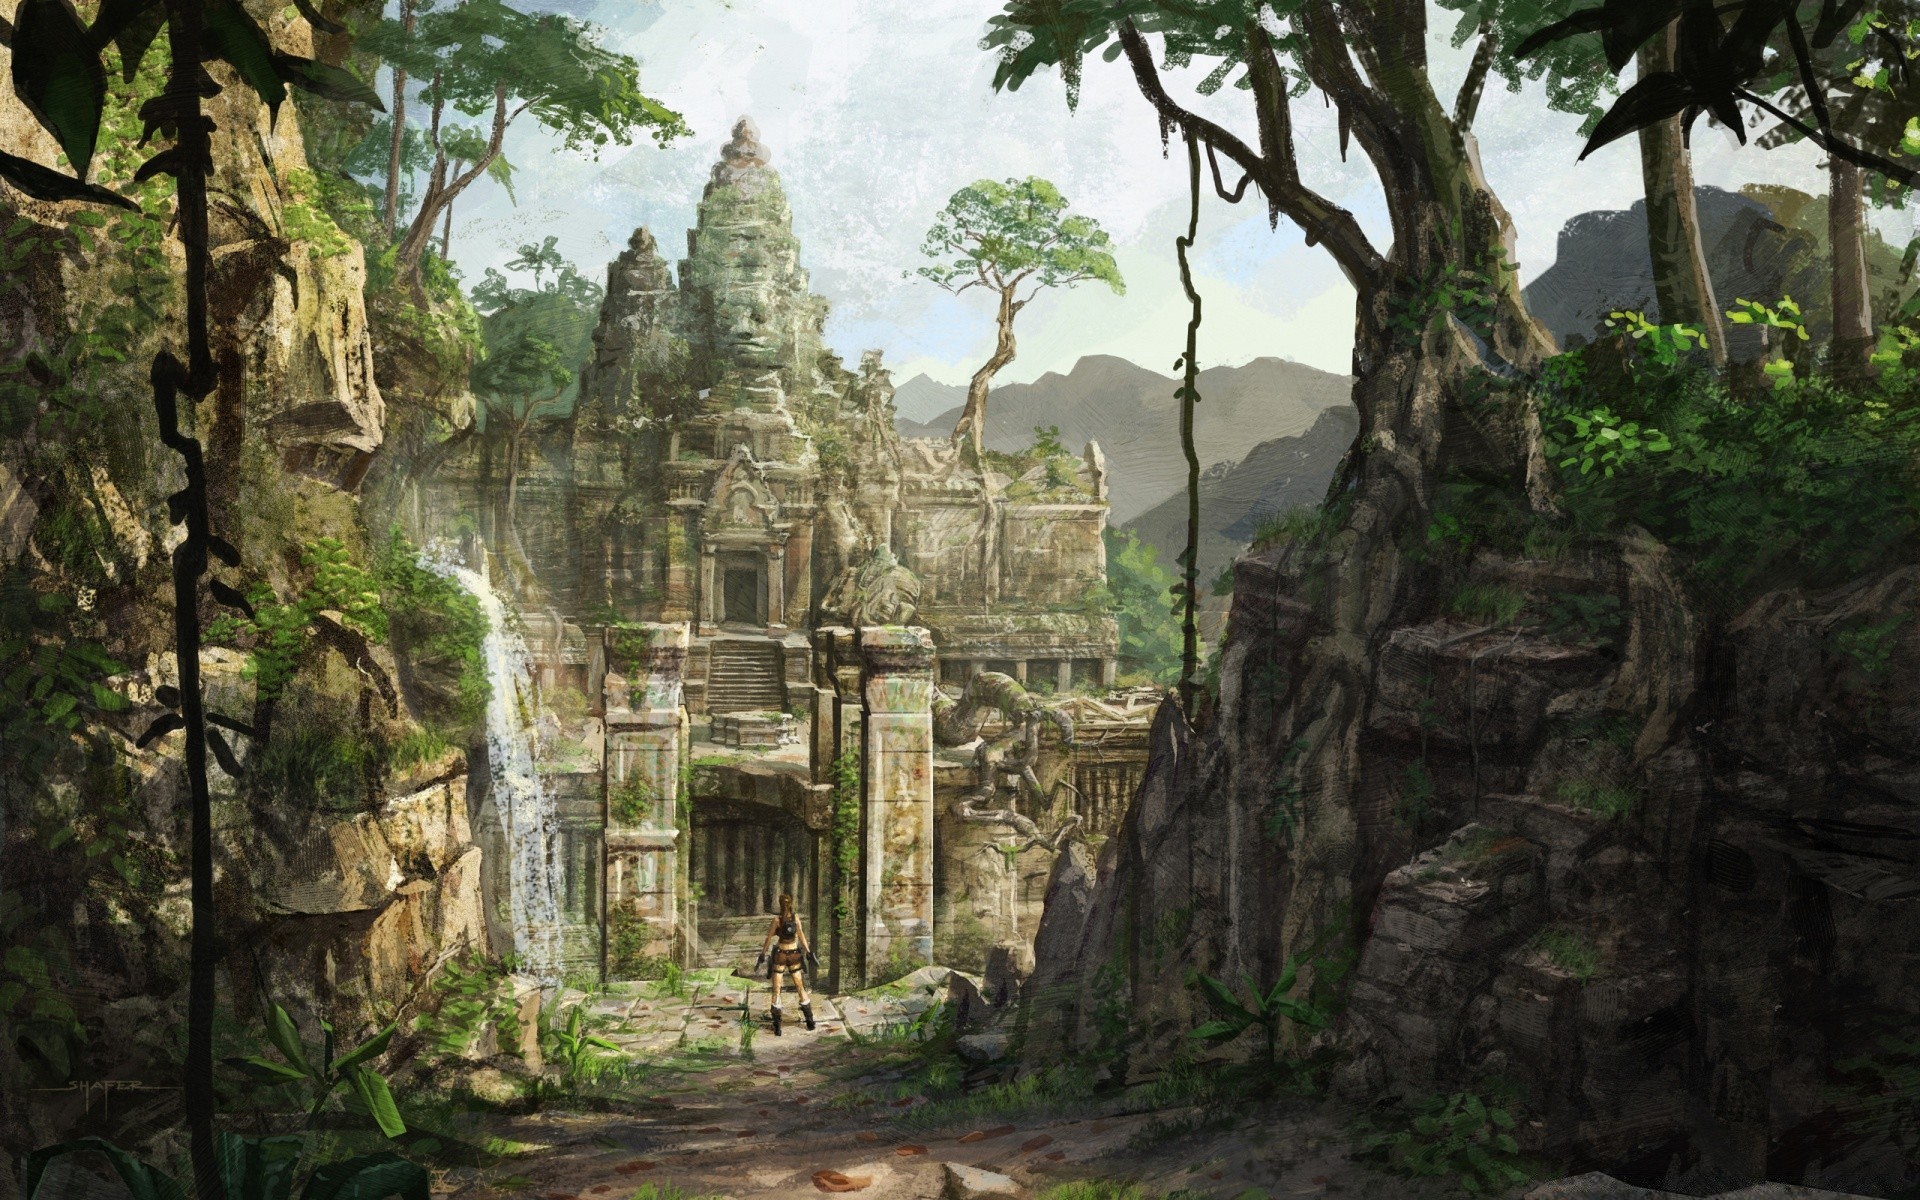 tomb raider travel ancient temple tree religion wood stone nature old jungle architecture wat outdoors buddha overgrown tropical tourism heritage leaf